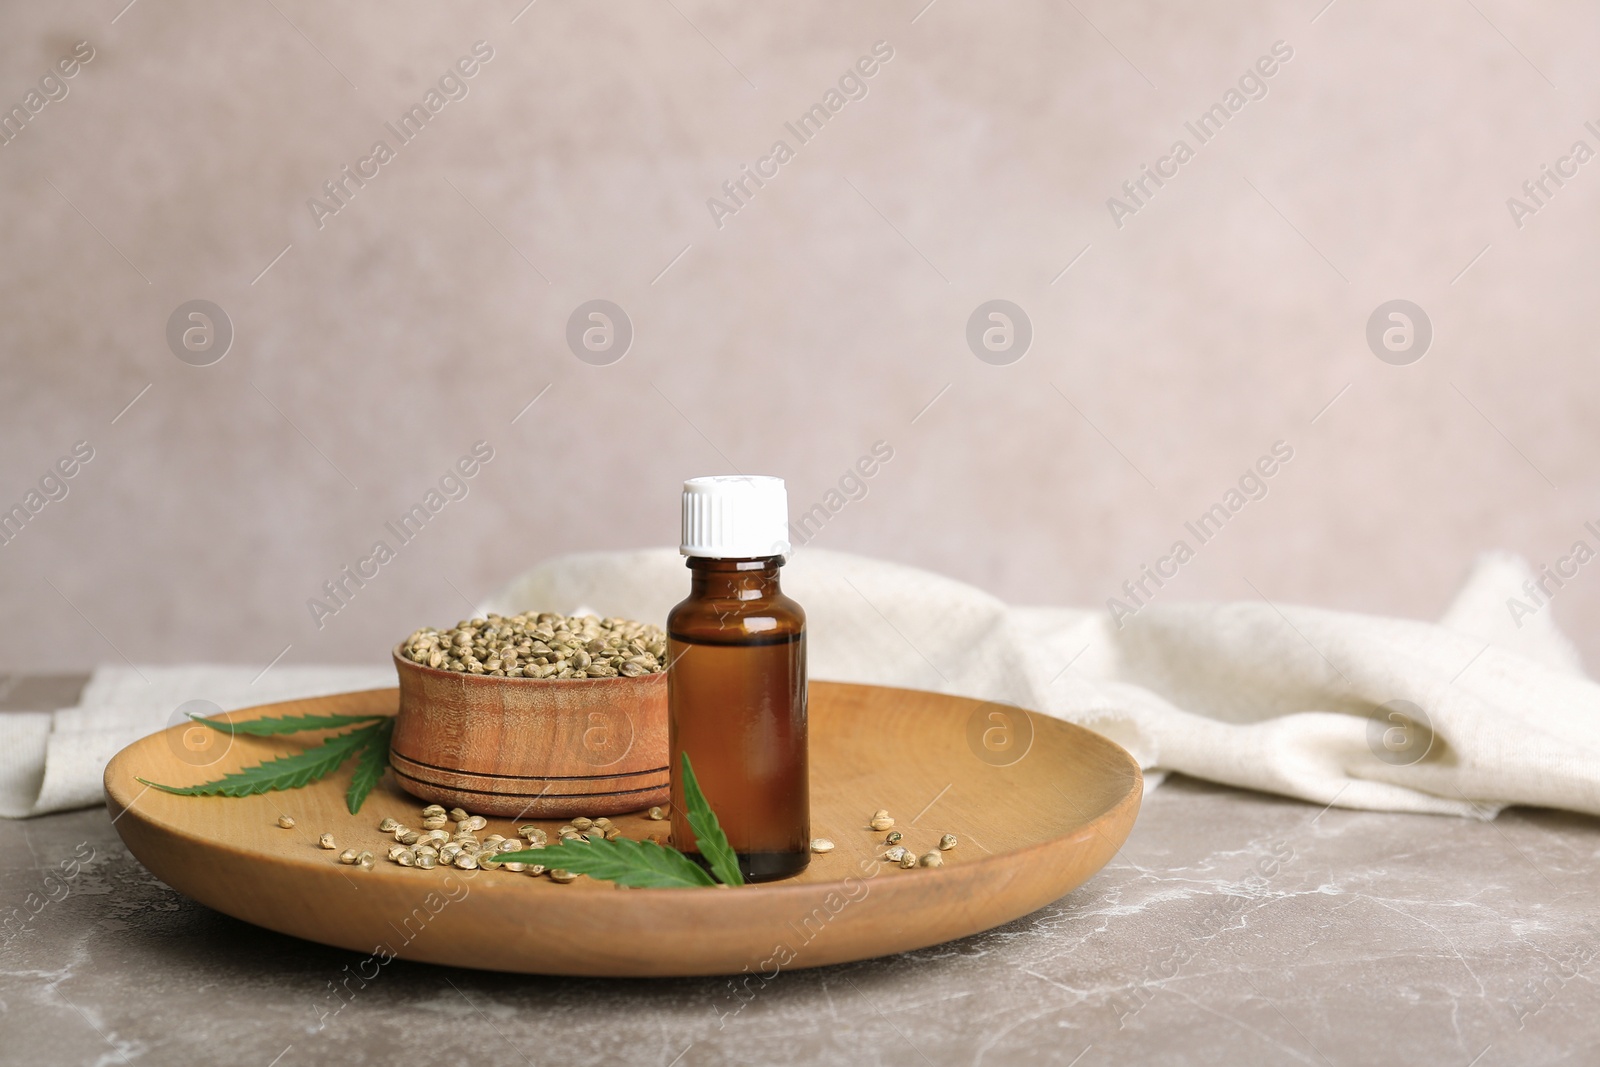 Photo of Plate with hemp seeds and bottle of extract on table